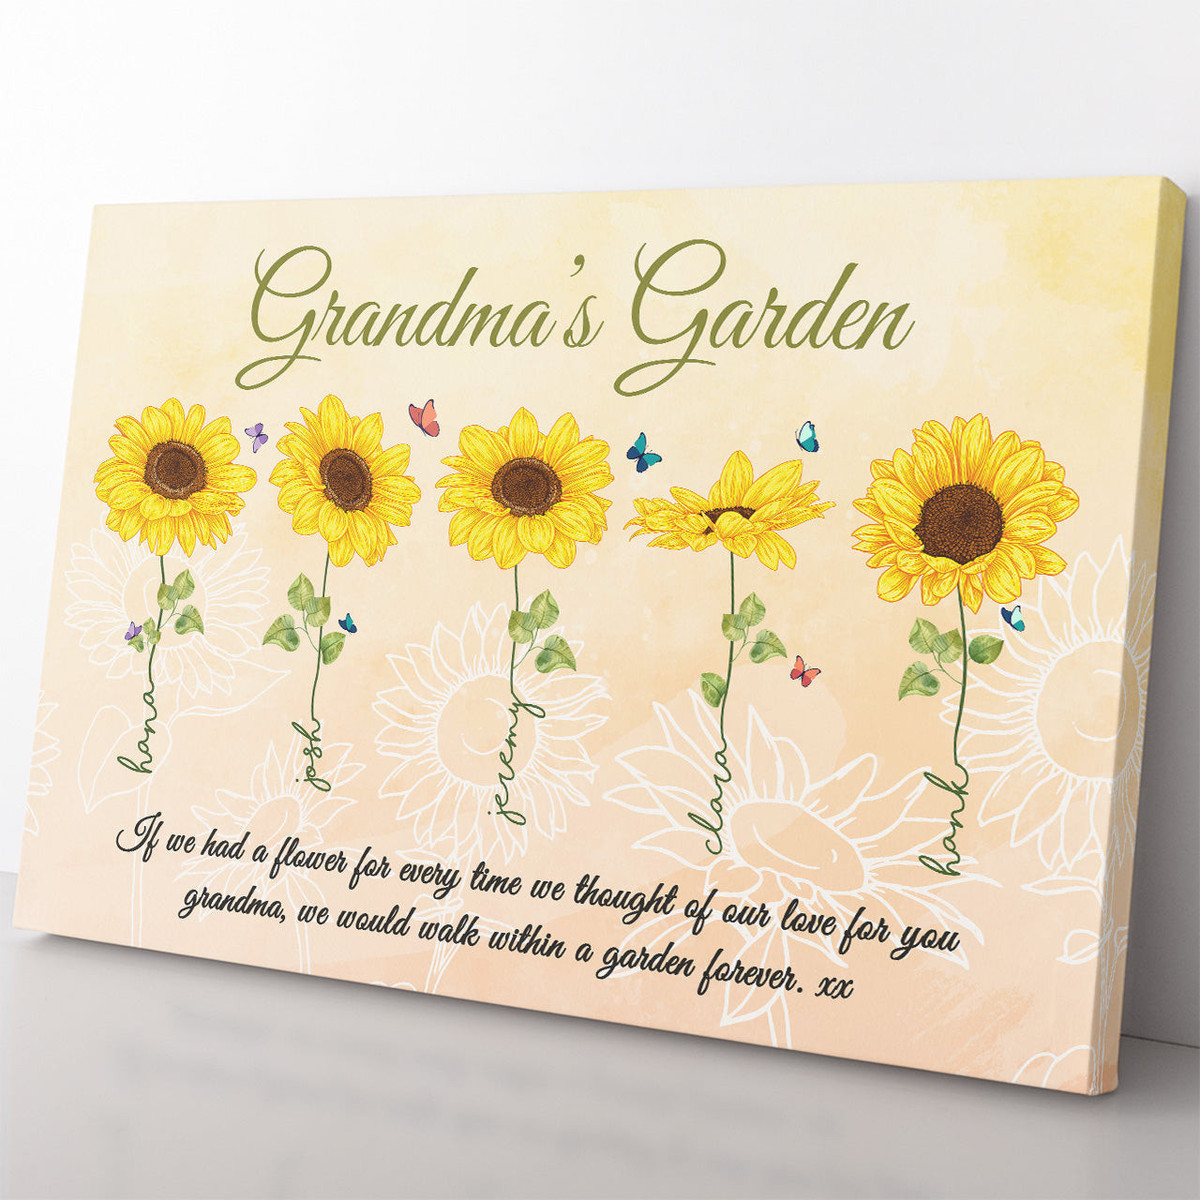 Personalized Grandkid Names Grandma'S Garden Sunflower Gift Ideas, Thought Of Our Love For You Gift For Grandma Framed Prints, Canvas Paintings Wrapped Canvas 8x10